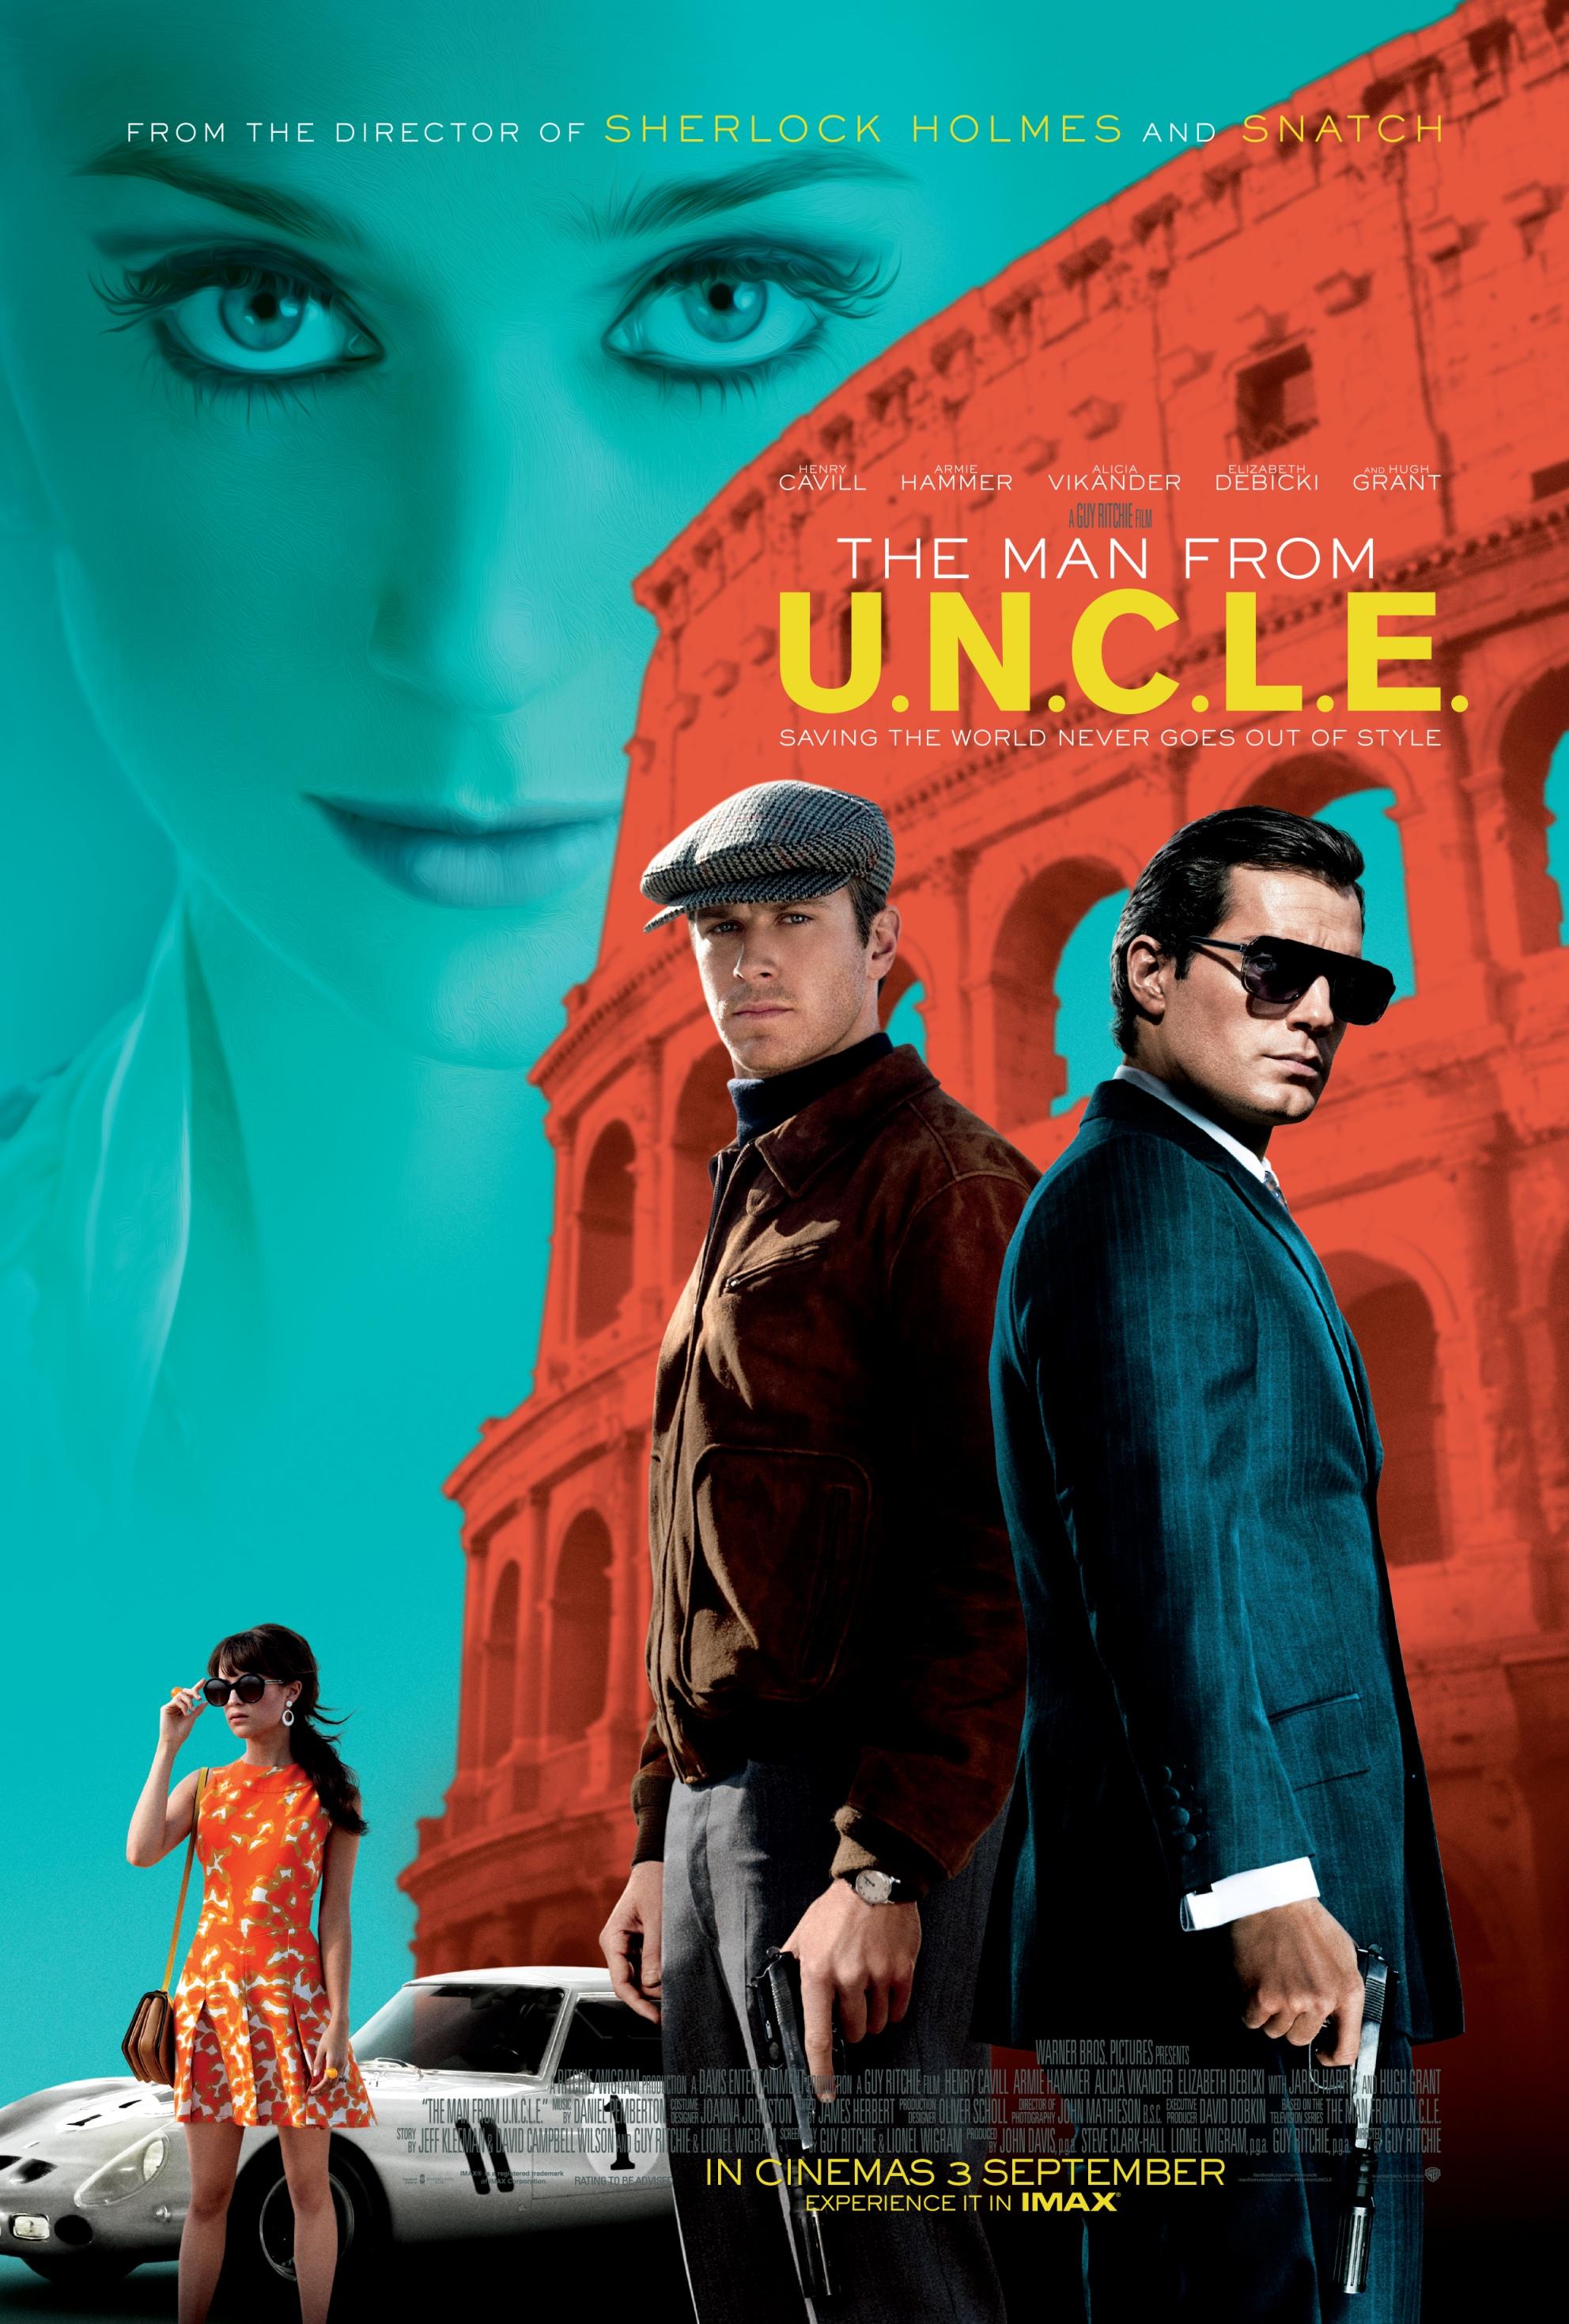 The Man From U.N.C.L.E. (2015) Main Poster